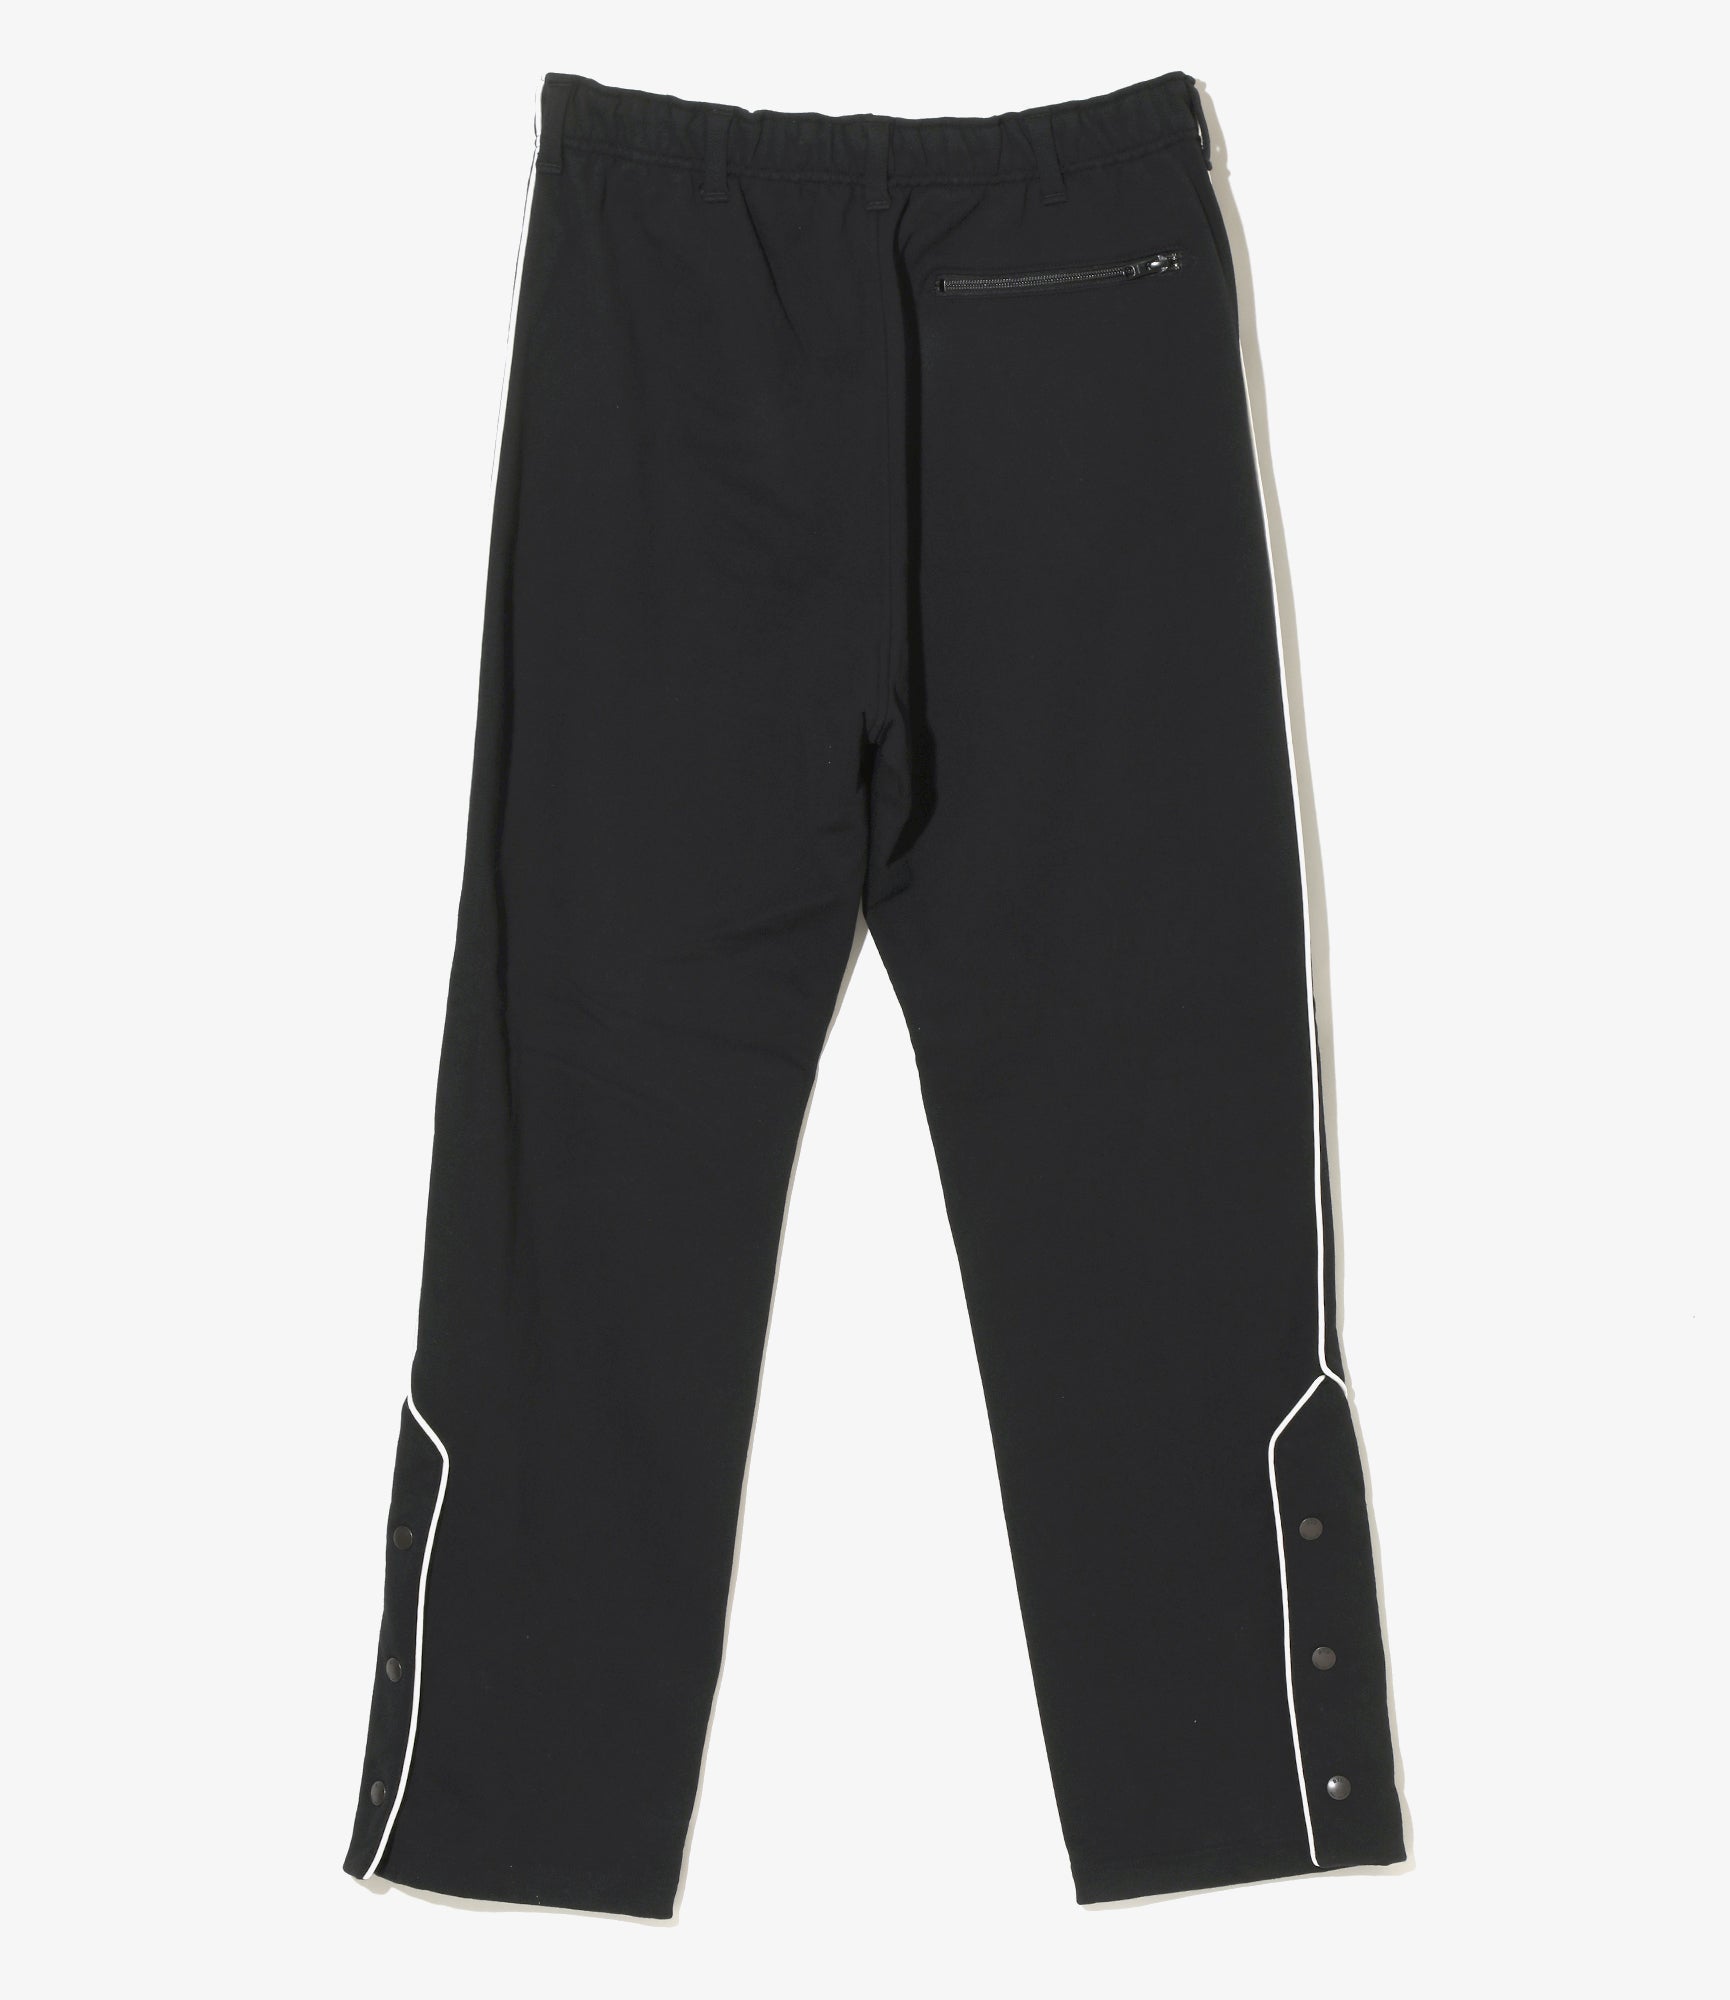 AiE Piping Sweat Pant - Cotton Lined Pile Fleece - Black